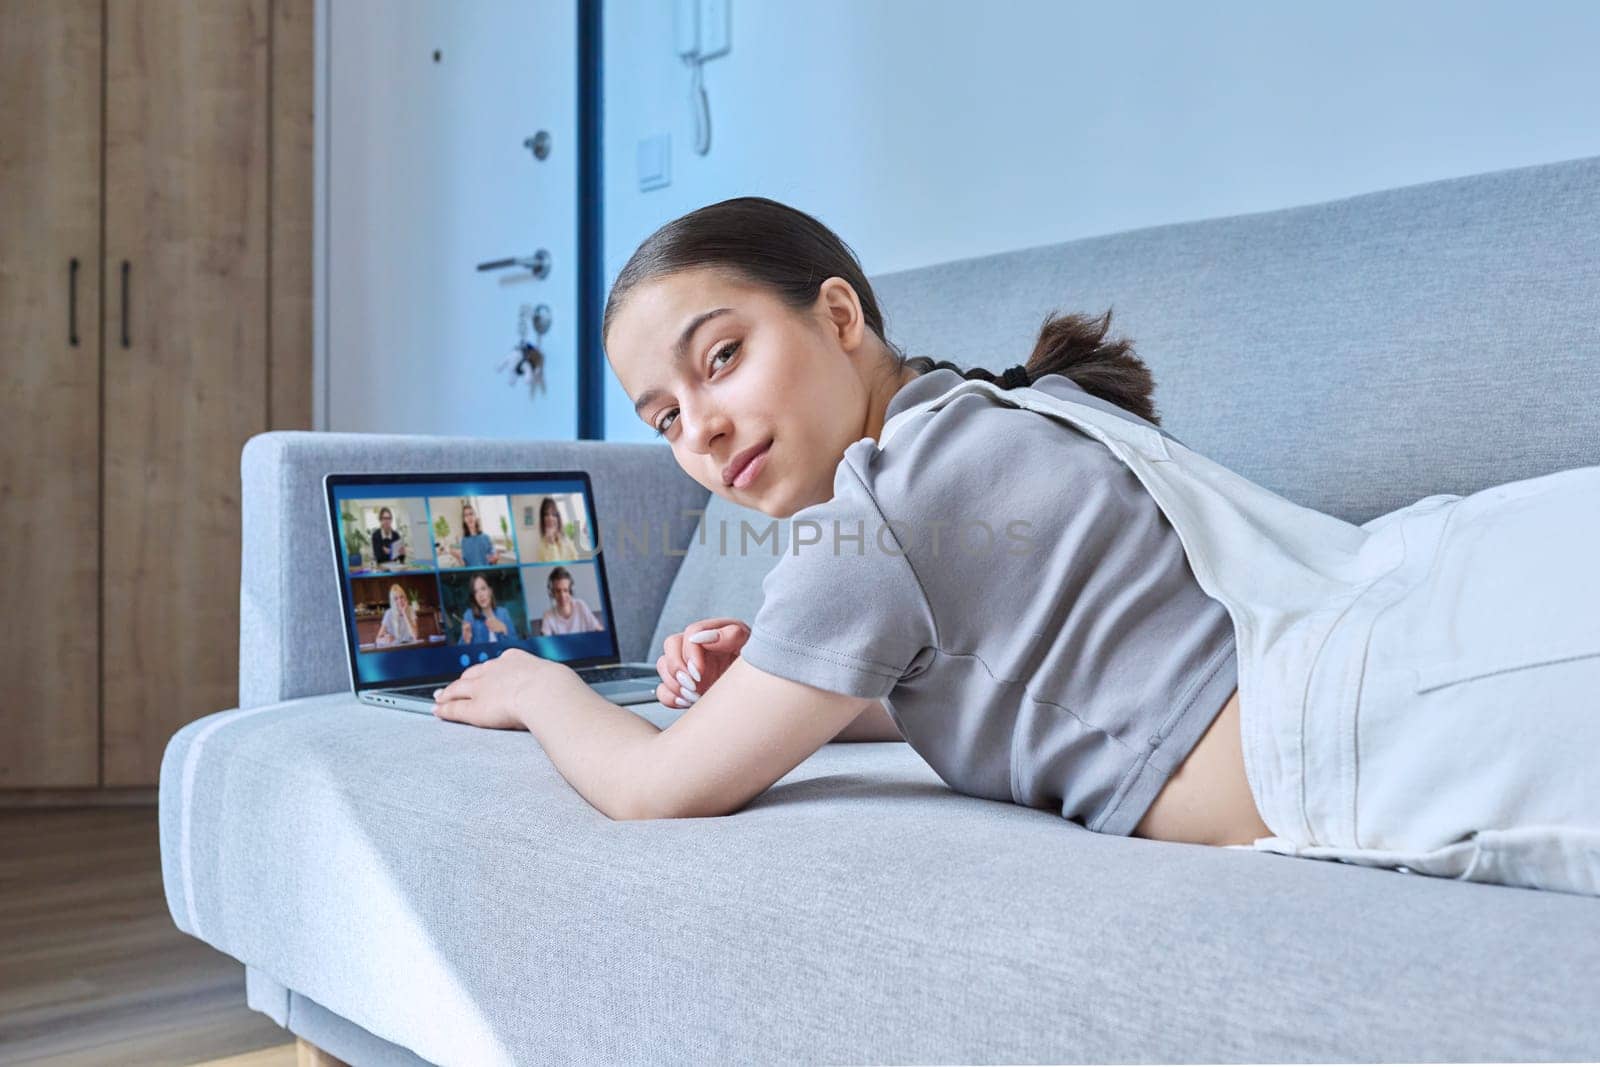 Video conference, laptop screen with group of students and teacher, teen girl looking at camera studying remotely at home. Online lesson distance learning course. E-education technology high school